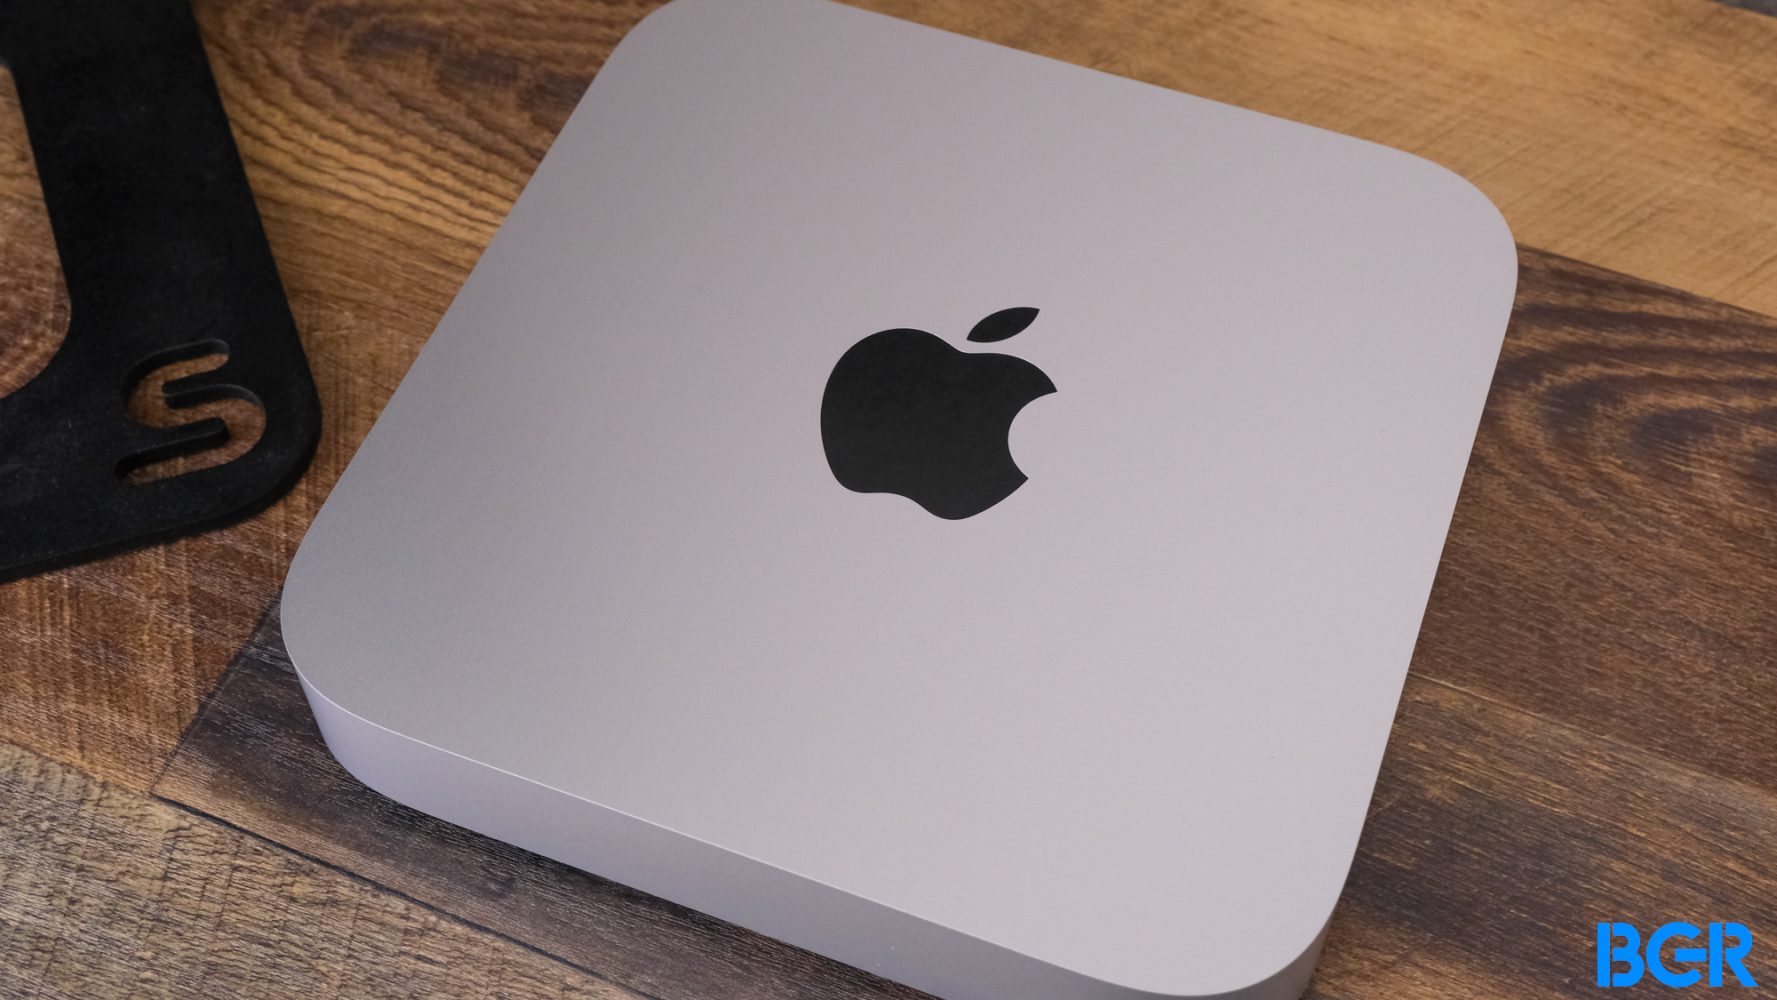 More people should be getting the M2 Mac mini instead of a MacBook